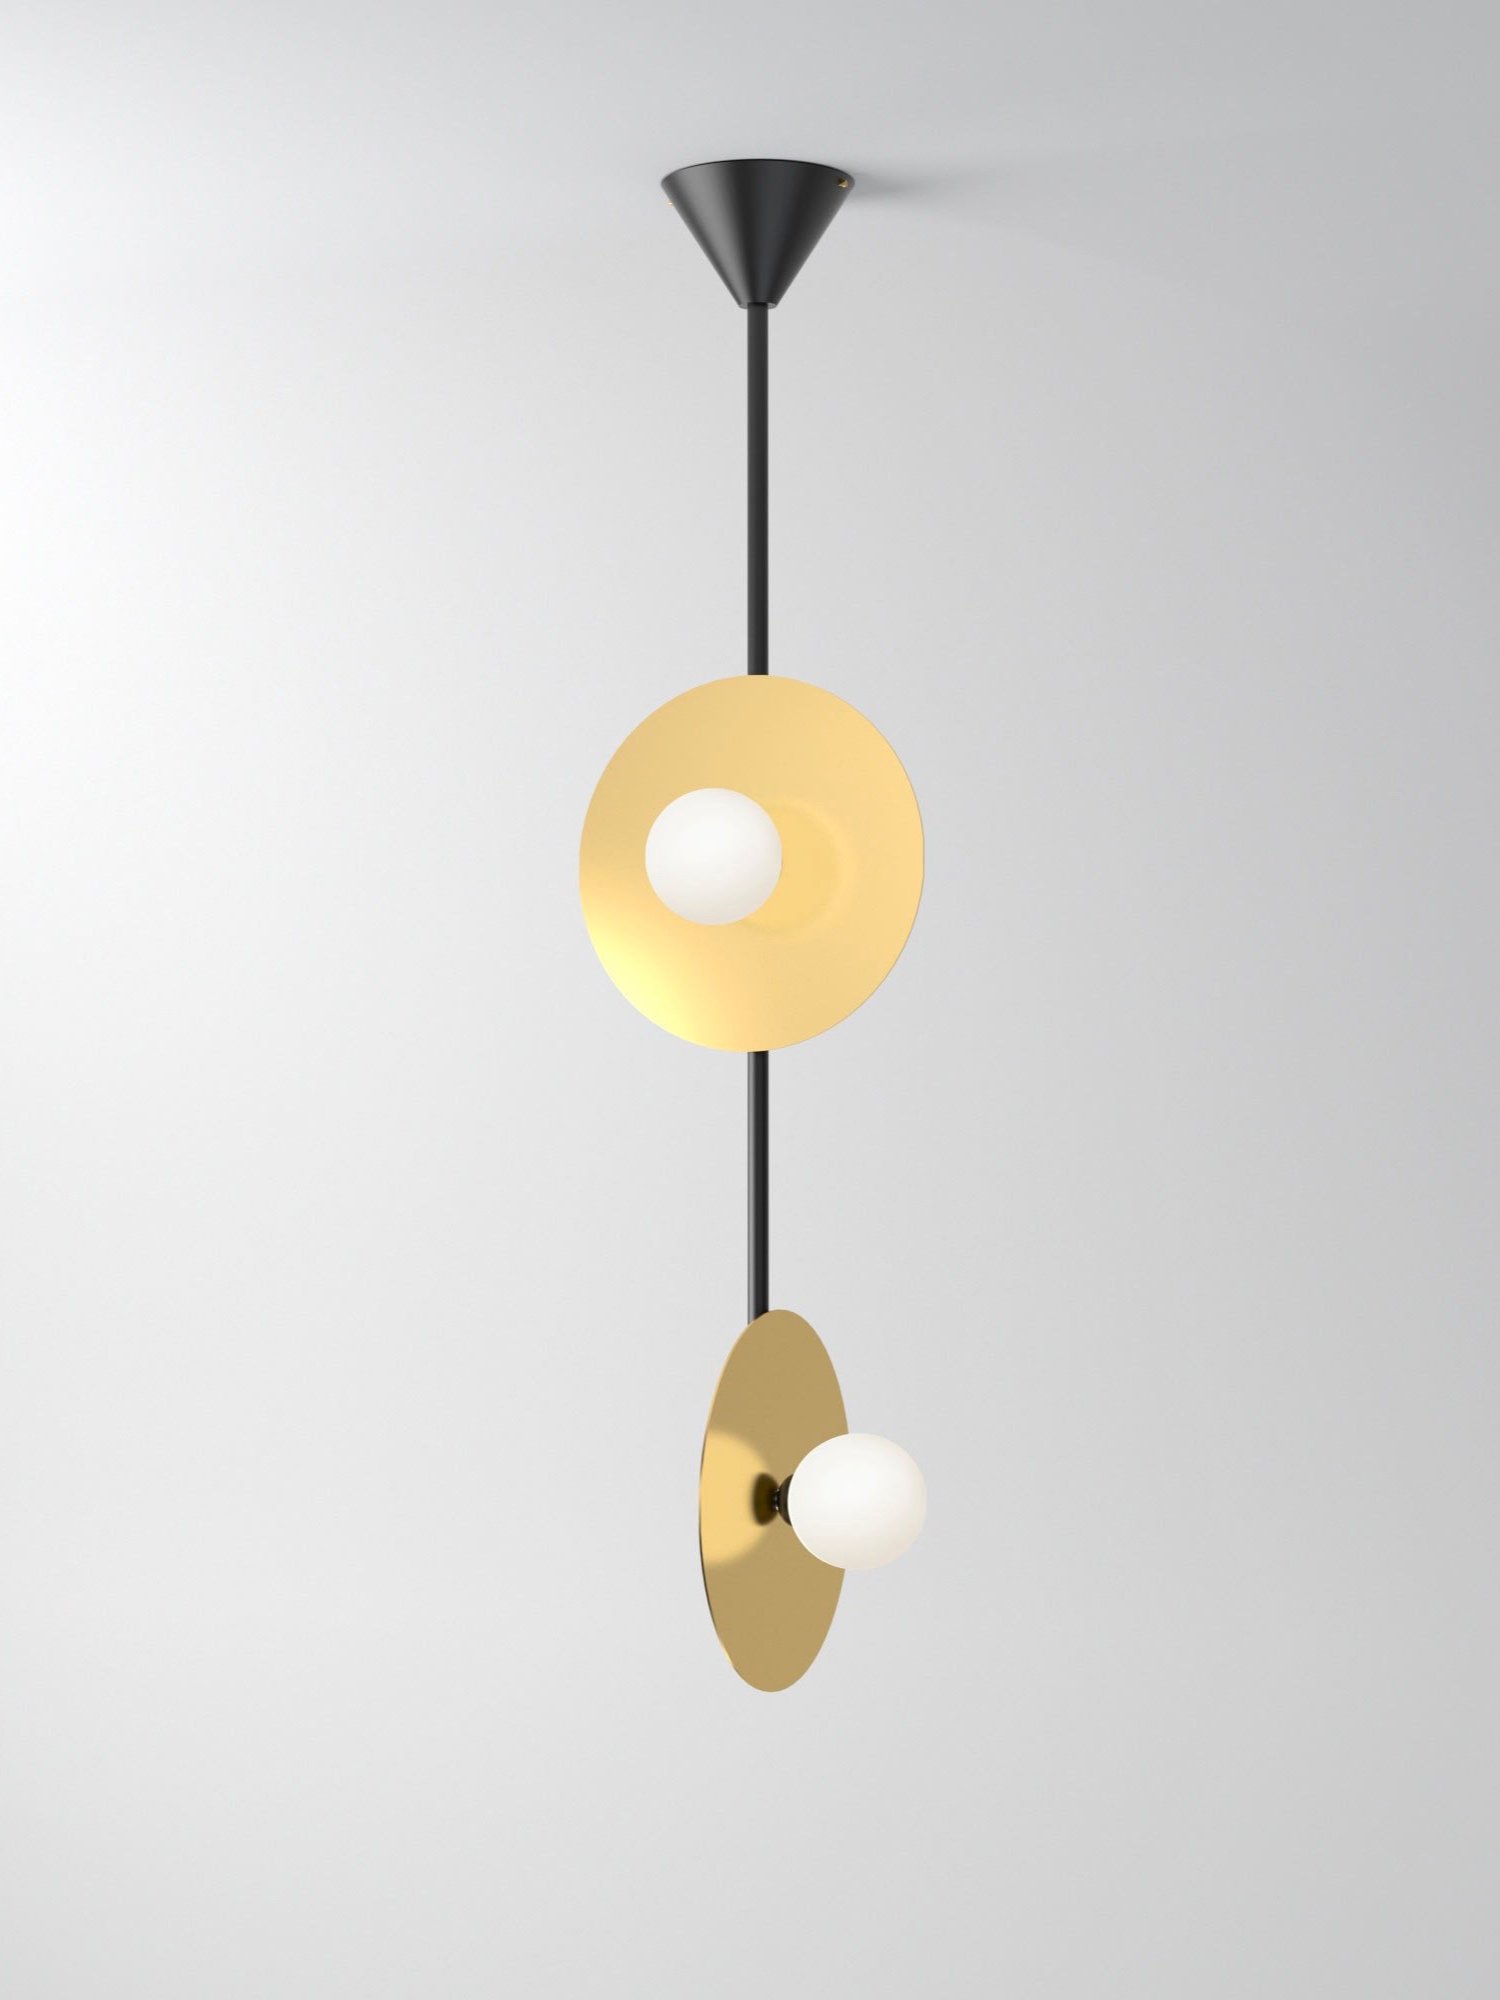 DISC AND SPHERE PENDANT LIGHT / VERTICAL - 2 DISC / CONE ATTACHMENT